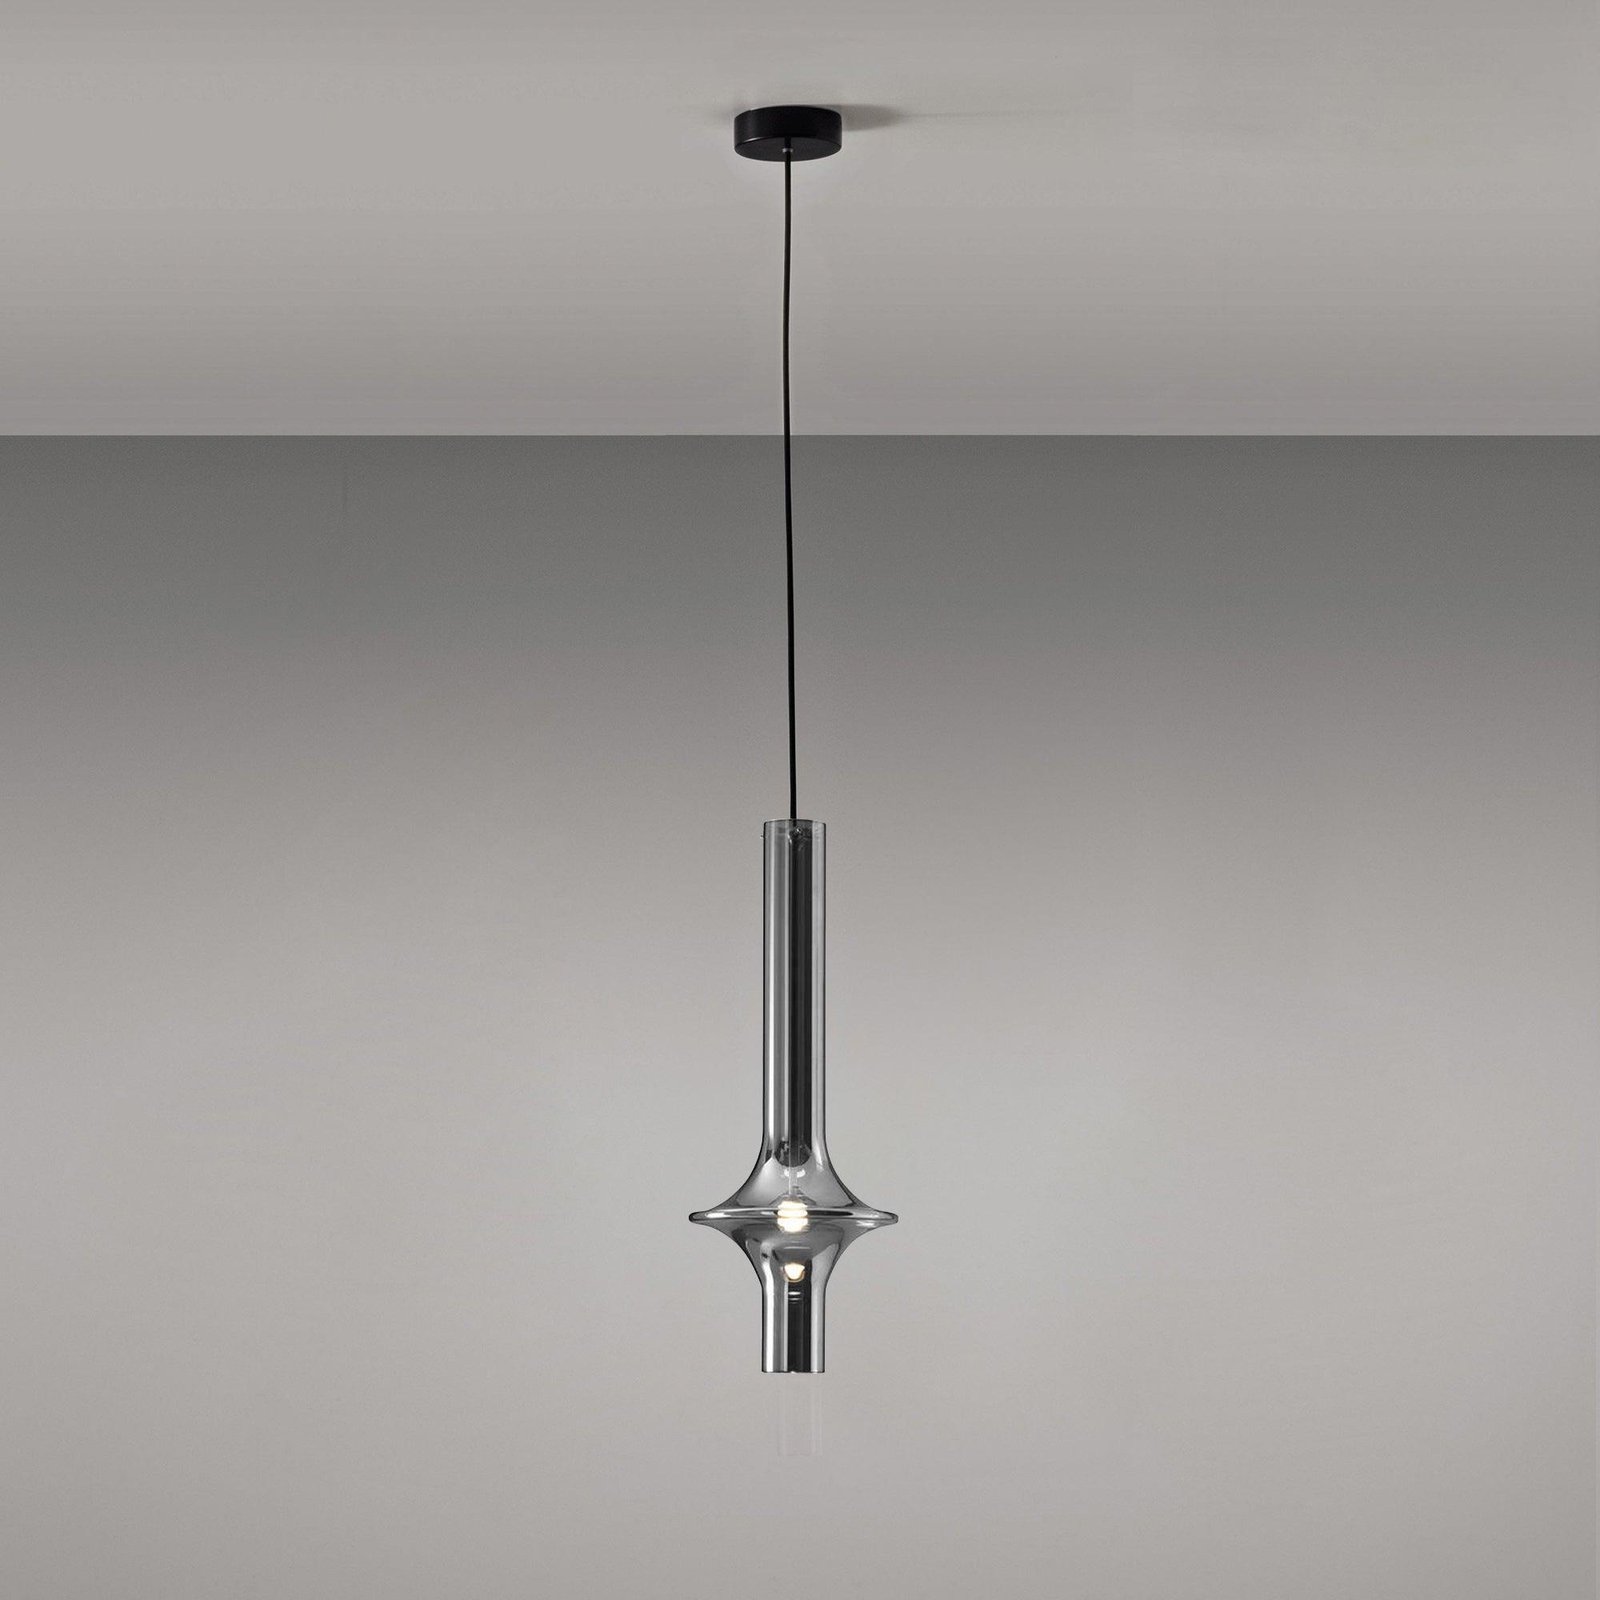 Black Smoky Wonder Suspension Lamp with a diameter of 8.3 inches and a height of 22 inches (21cm x 56cm)